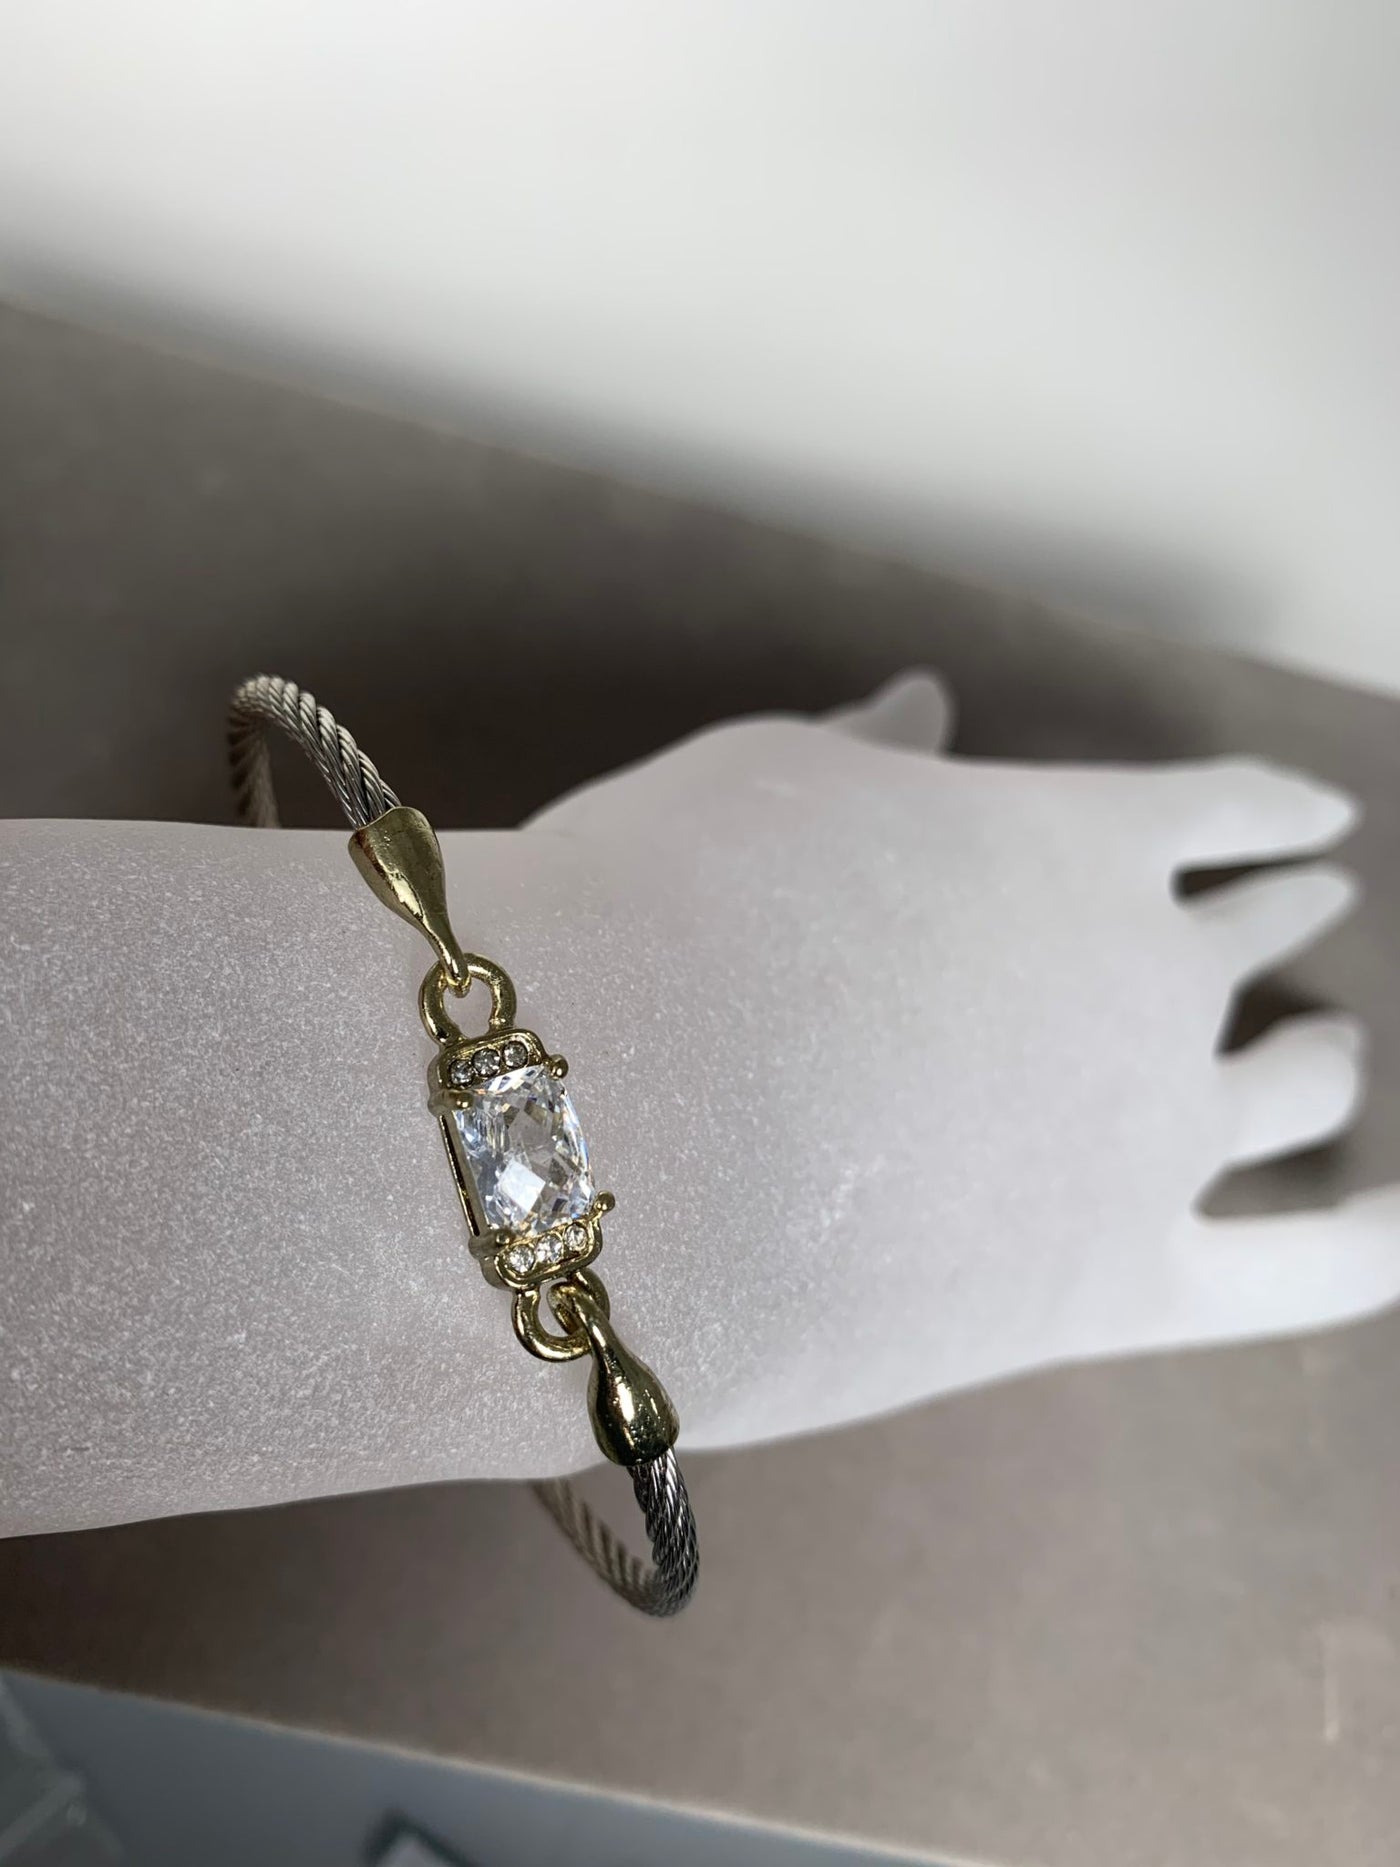 Silver Tone Wire Bangle Bracelet featuring Clear Crystal